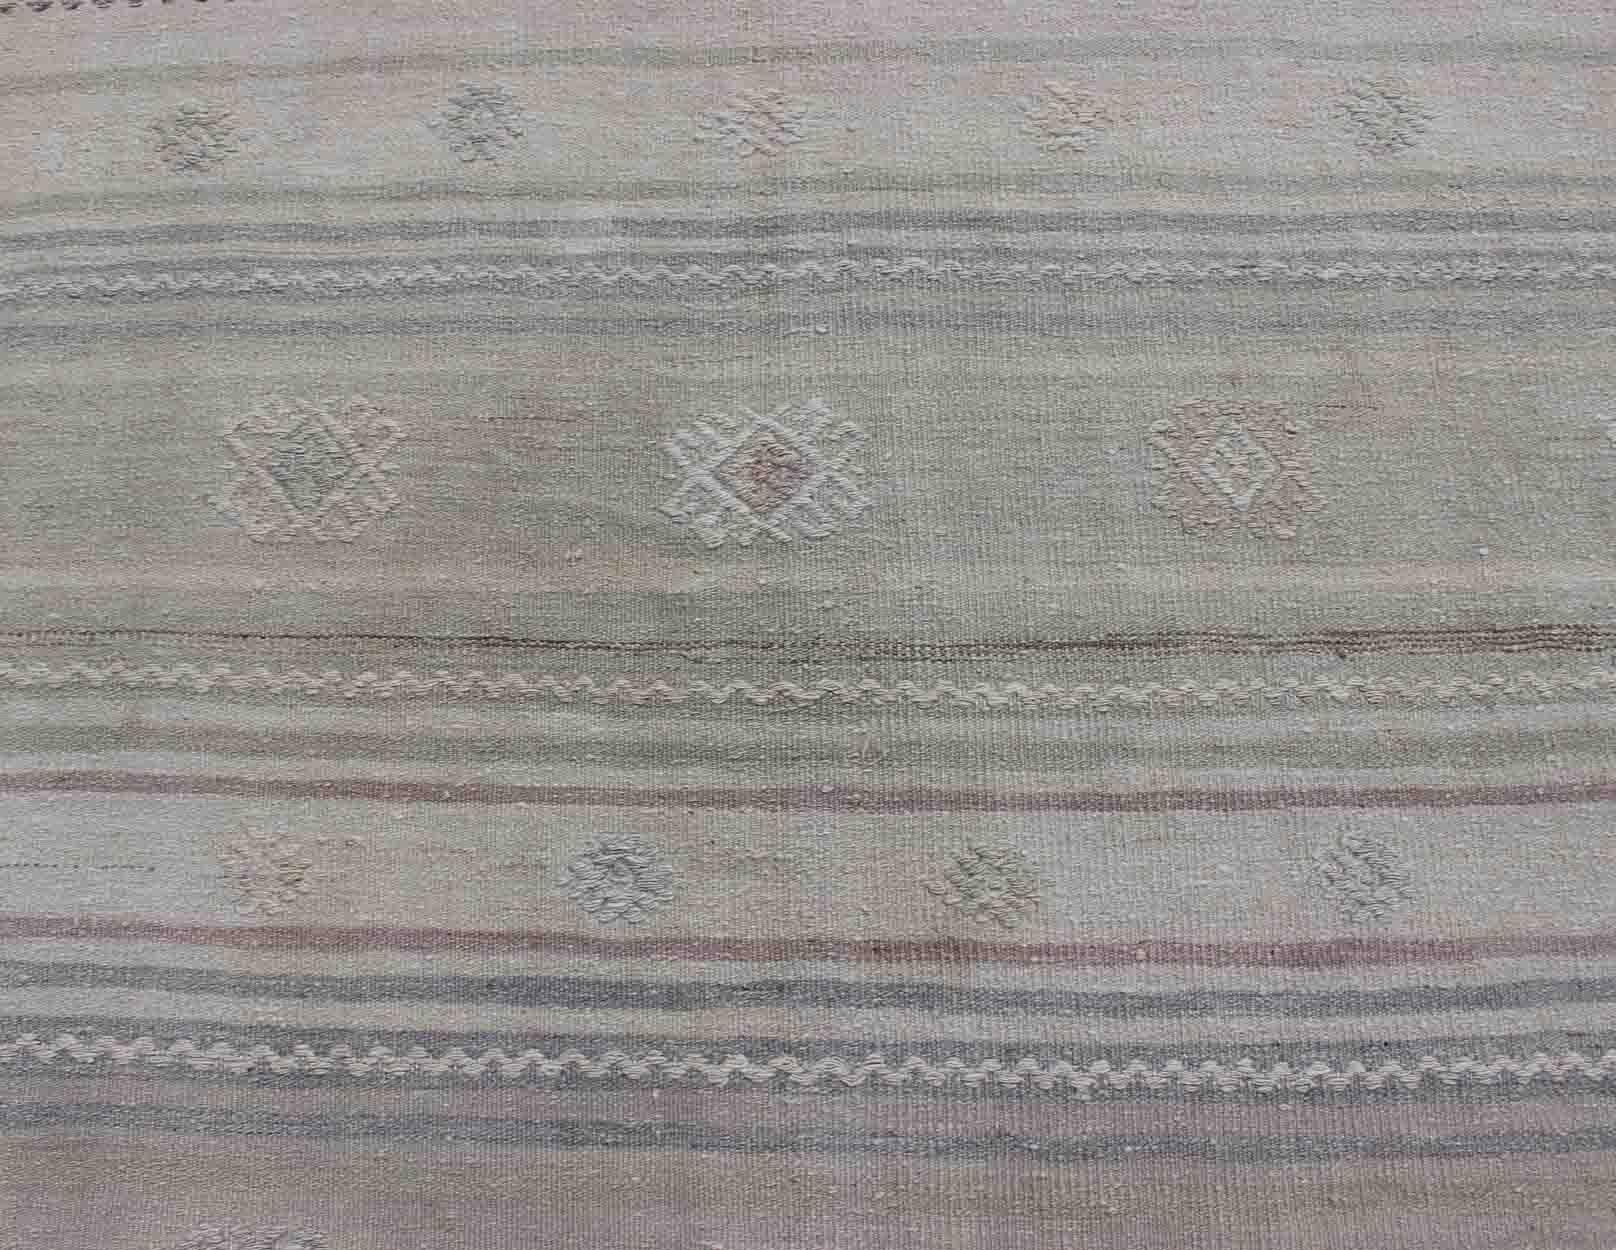 Wool Vintage Hand Woven Turkish Kilim Runner With Stripes in Gray and Natural Tones For Sale